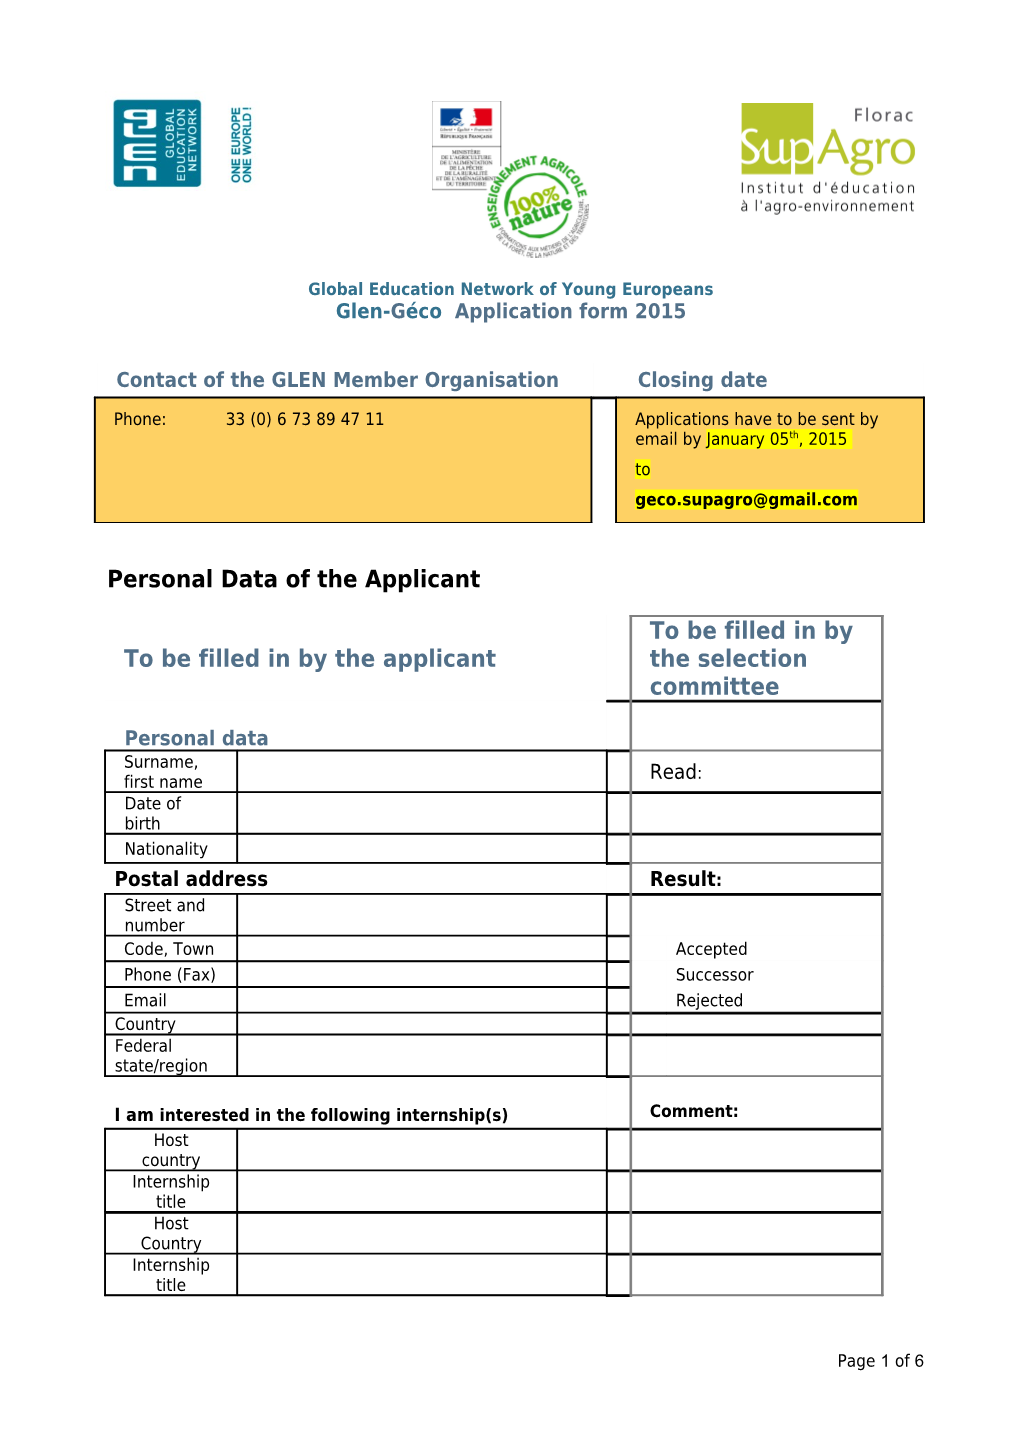 Application File - Personal Data of the Applicant